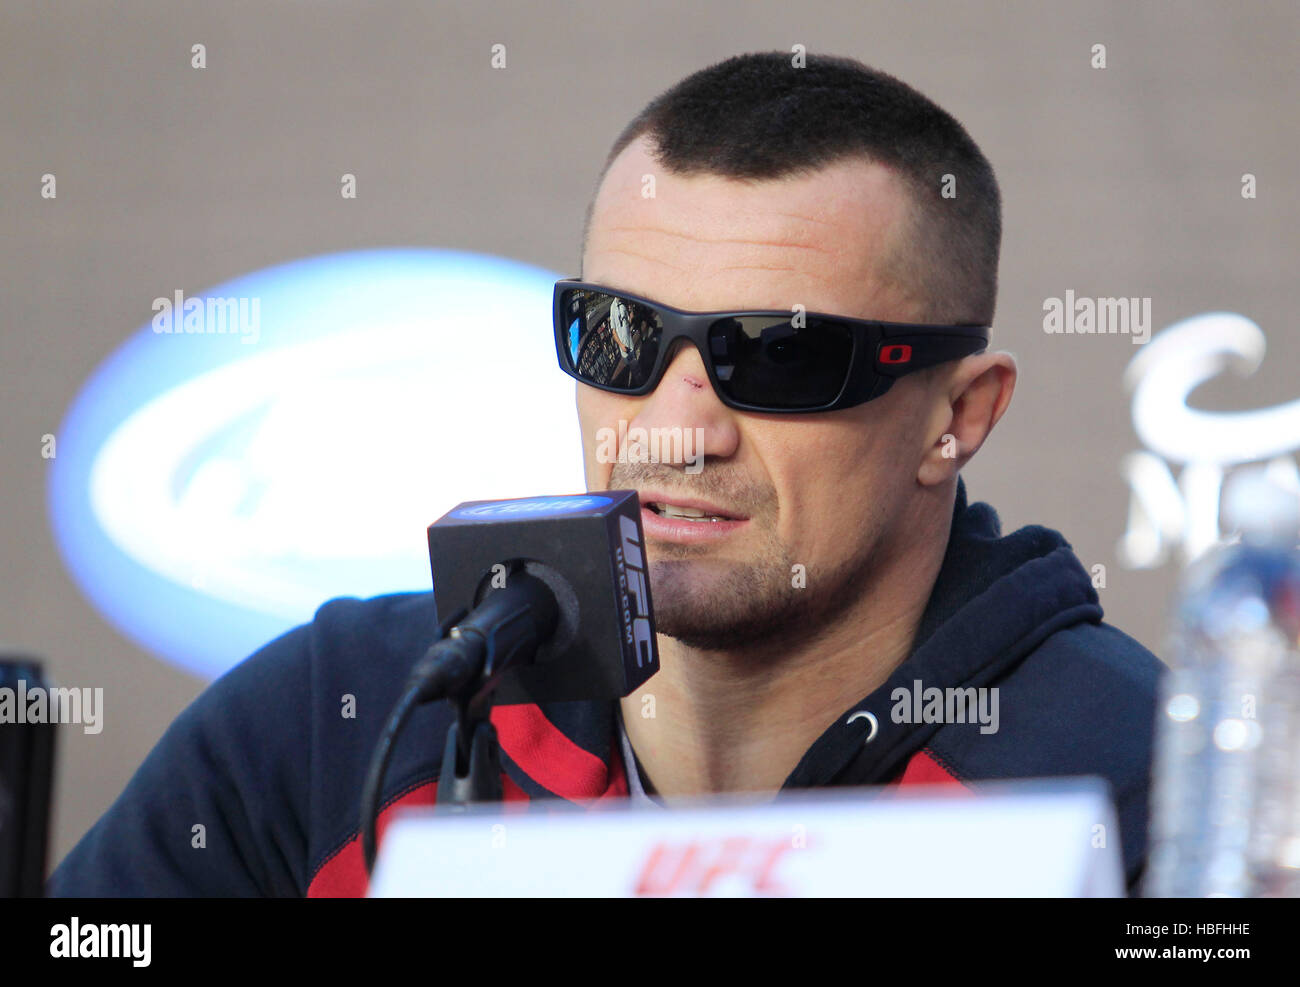 UFC fighter Mirko Cro Cop during a press conference for UFC 137 in Las Vegas, Nevada on Thursday, October 27, 2011. Photo by Francis Specker Stock Photo